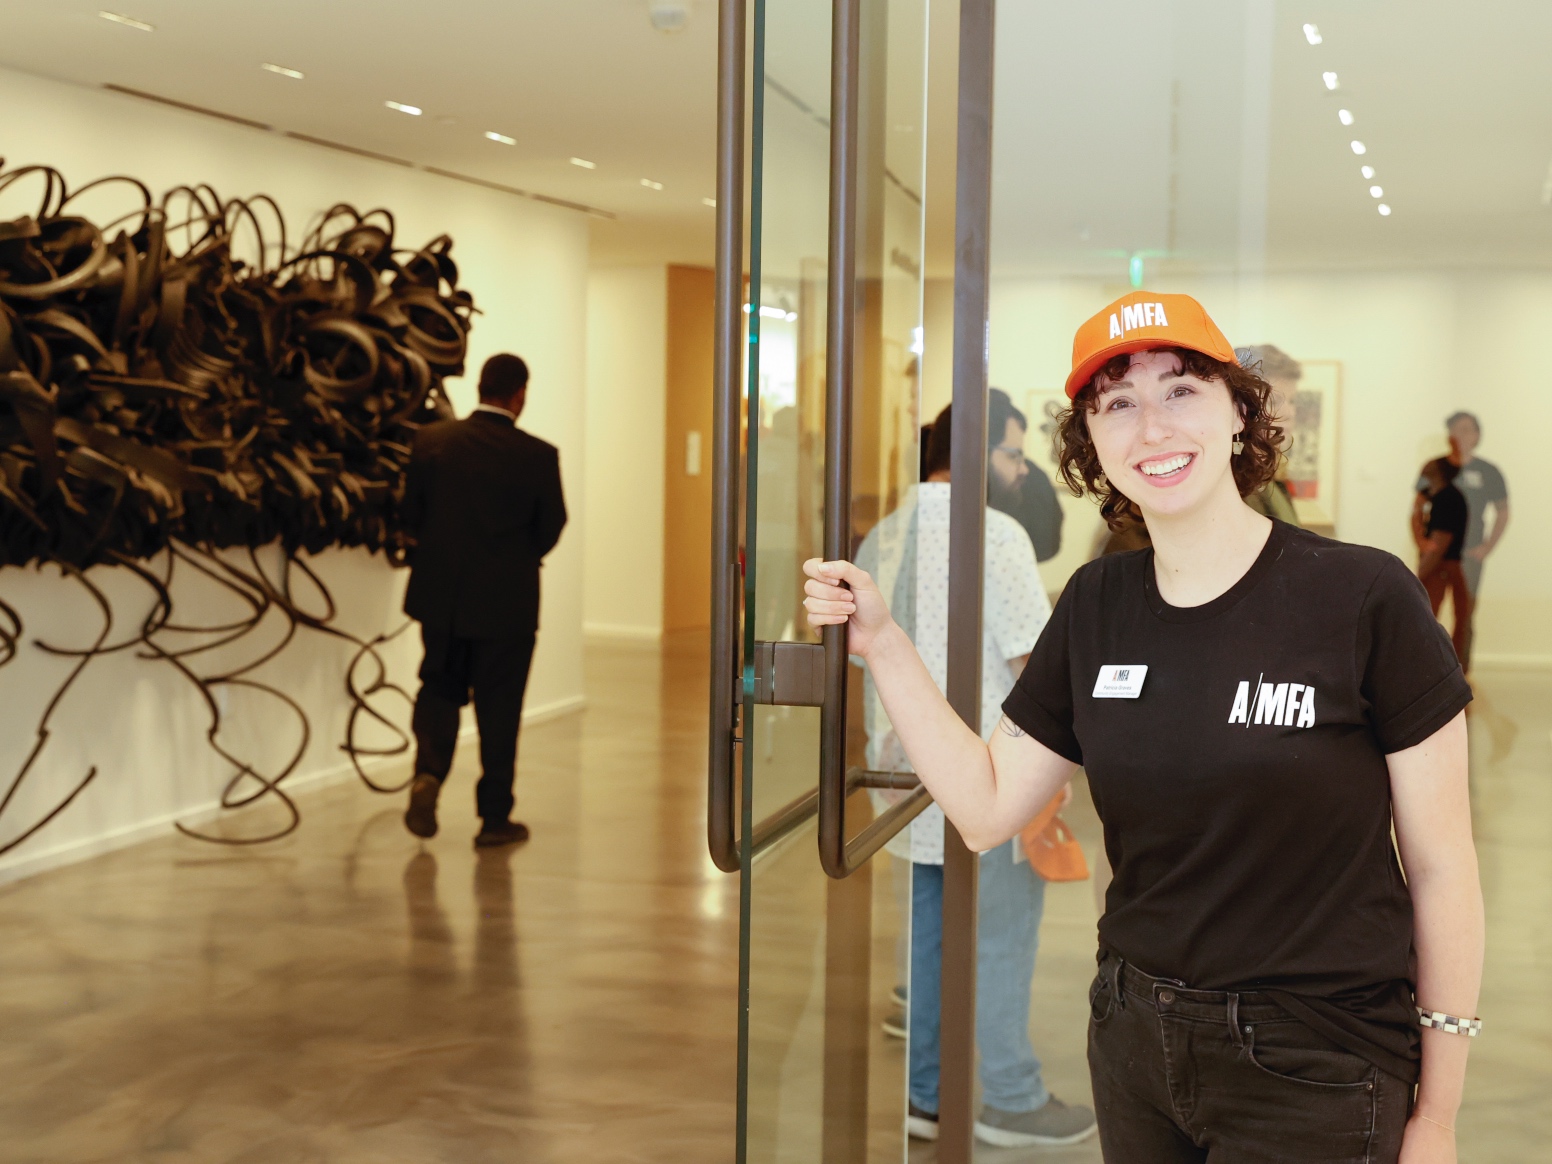 Photo of a woman wearing an AMFA T-shirt and hat holding open the door to an art gallery.